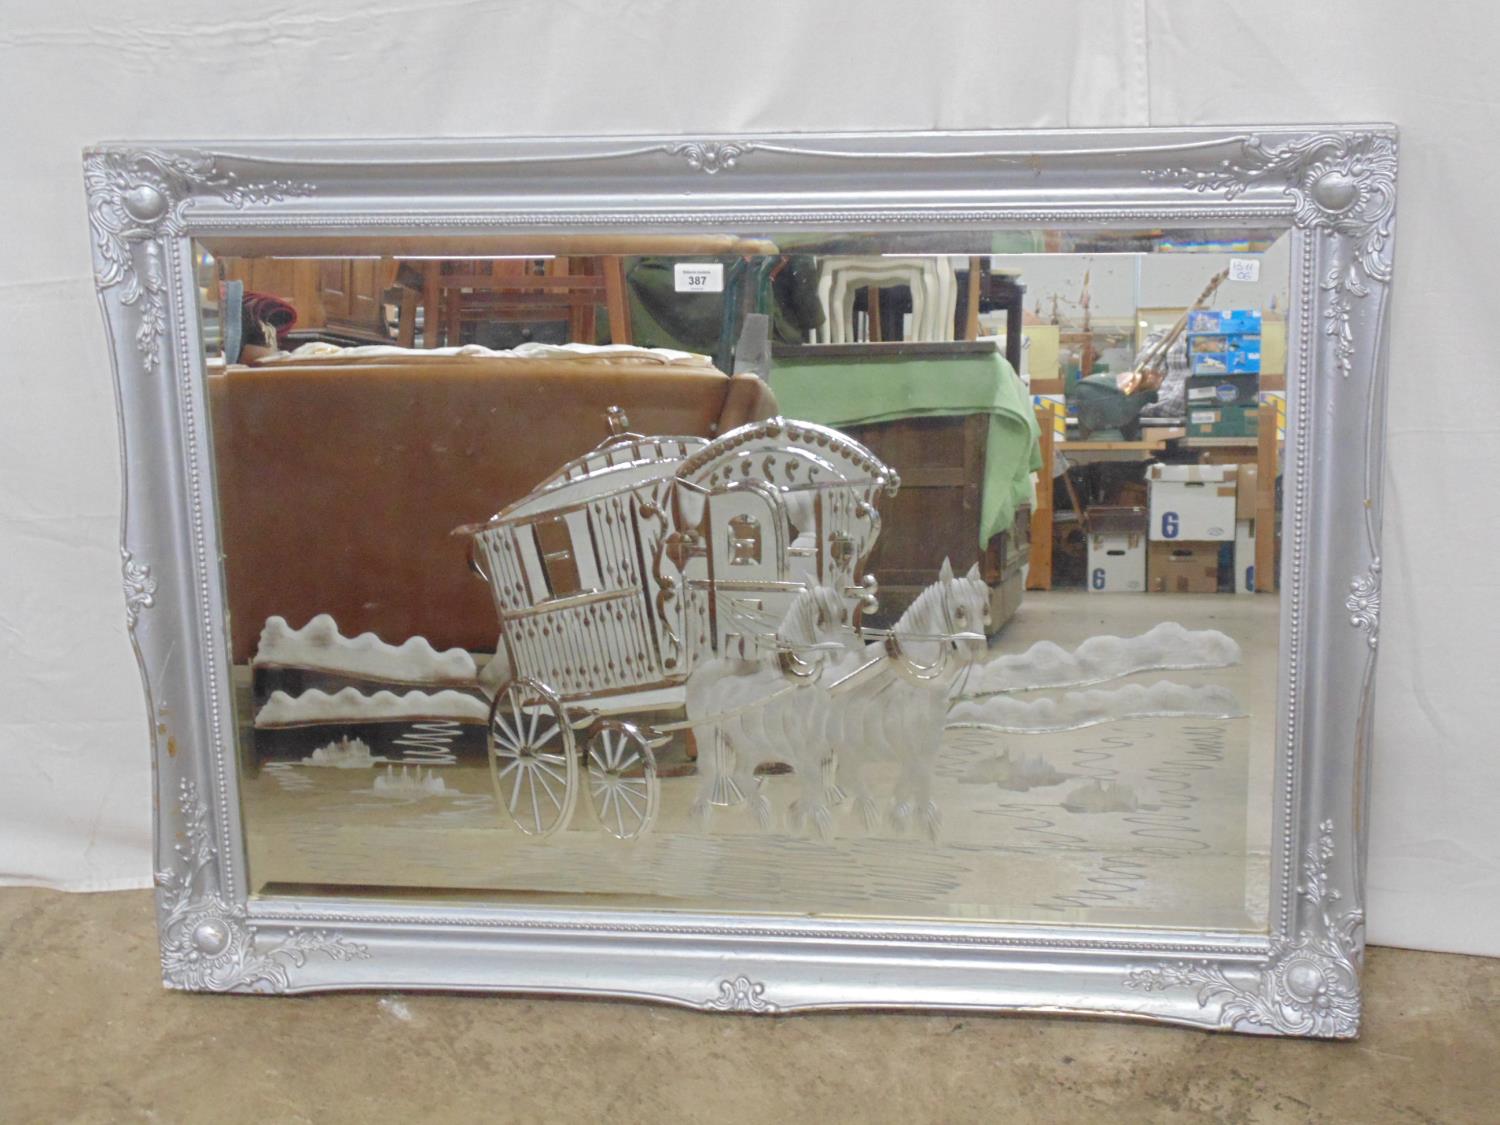 Bevel edge etched mirror with scene of a gypsy caravan being pulled by two horses, in painted silver